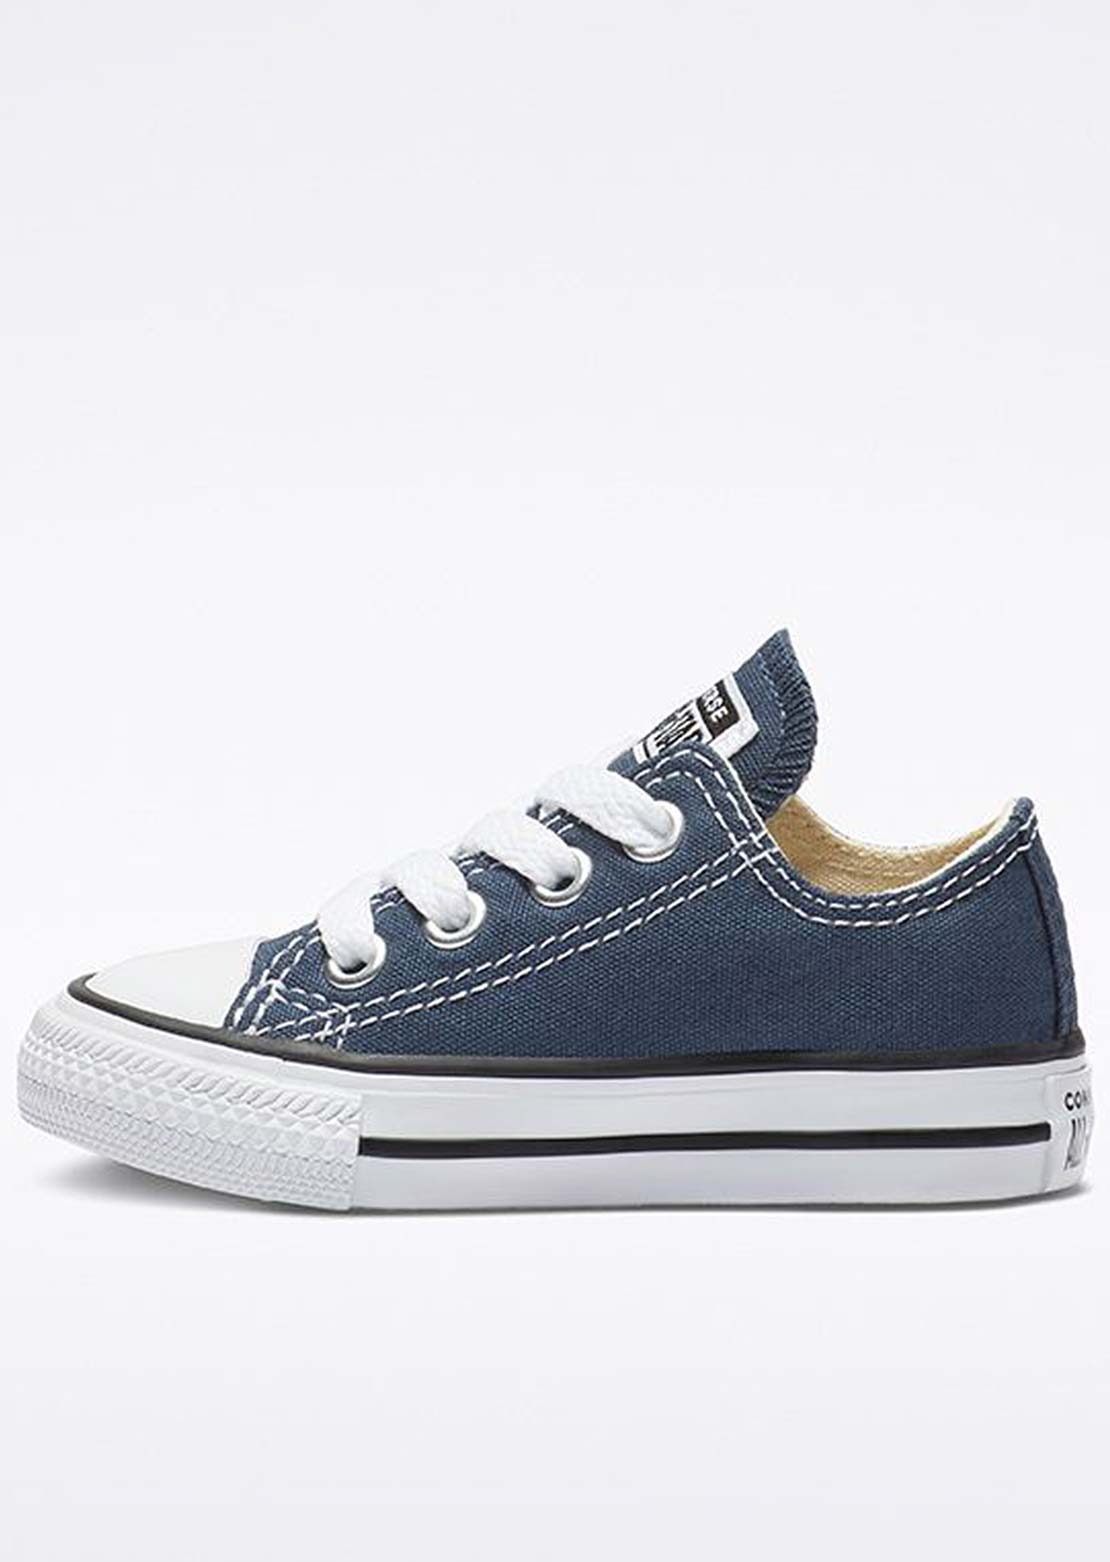 Converse Infant Chuck Taylor All Star Low-Top Shoes Navy